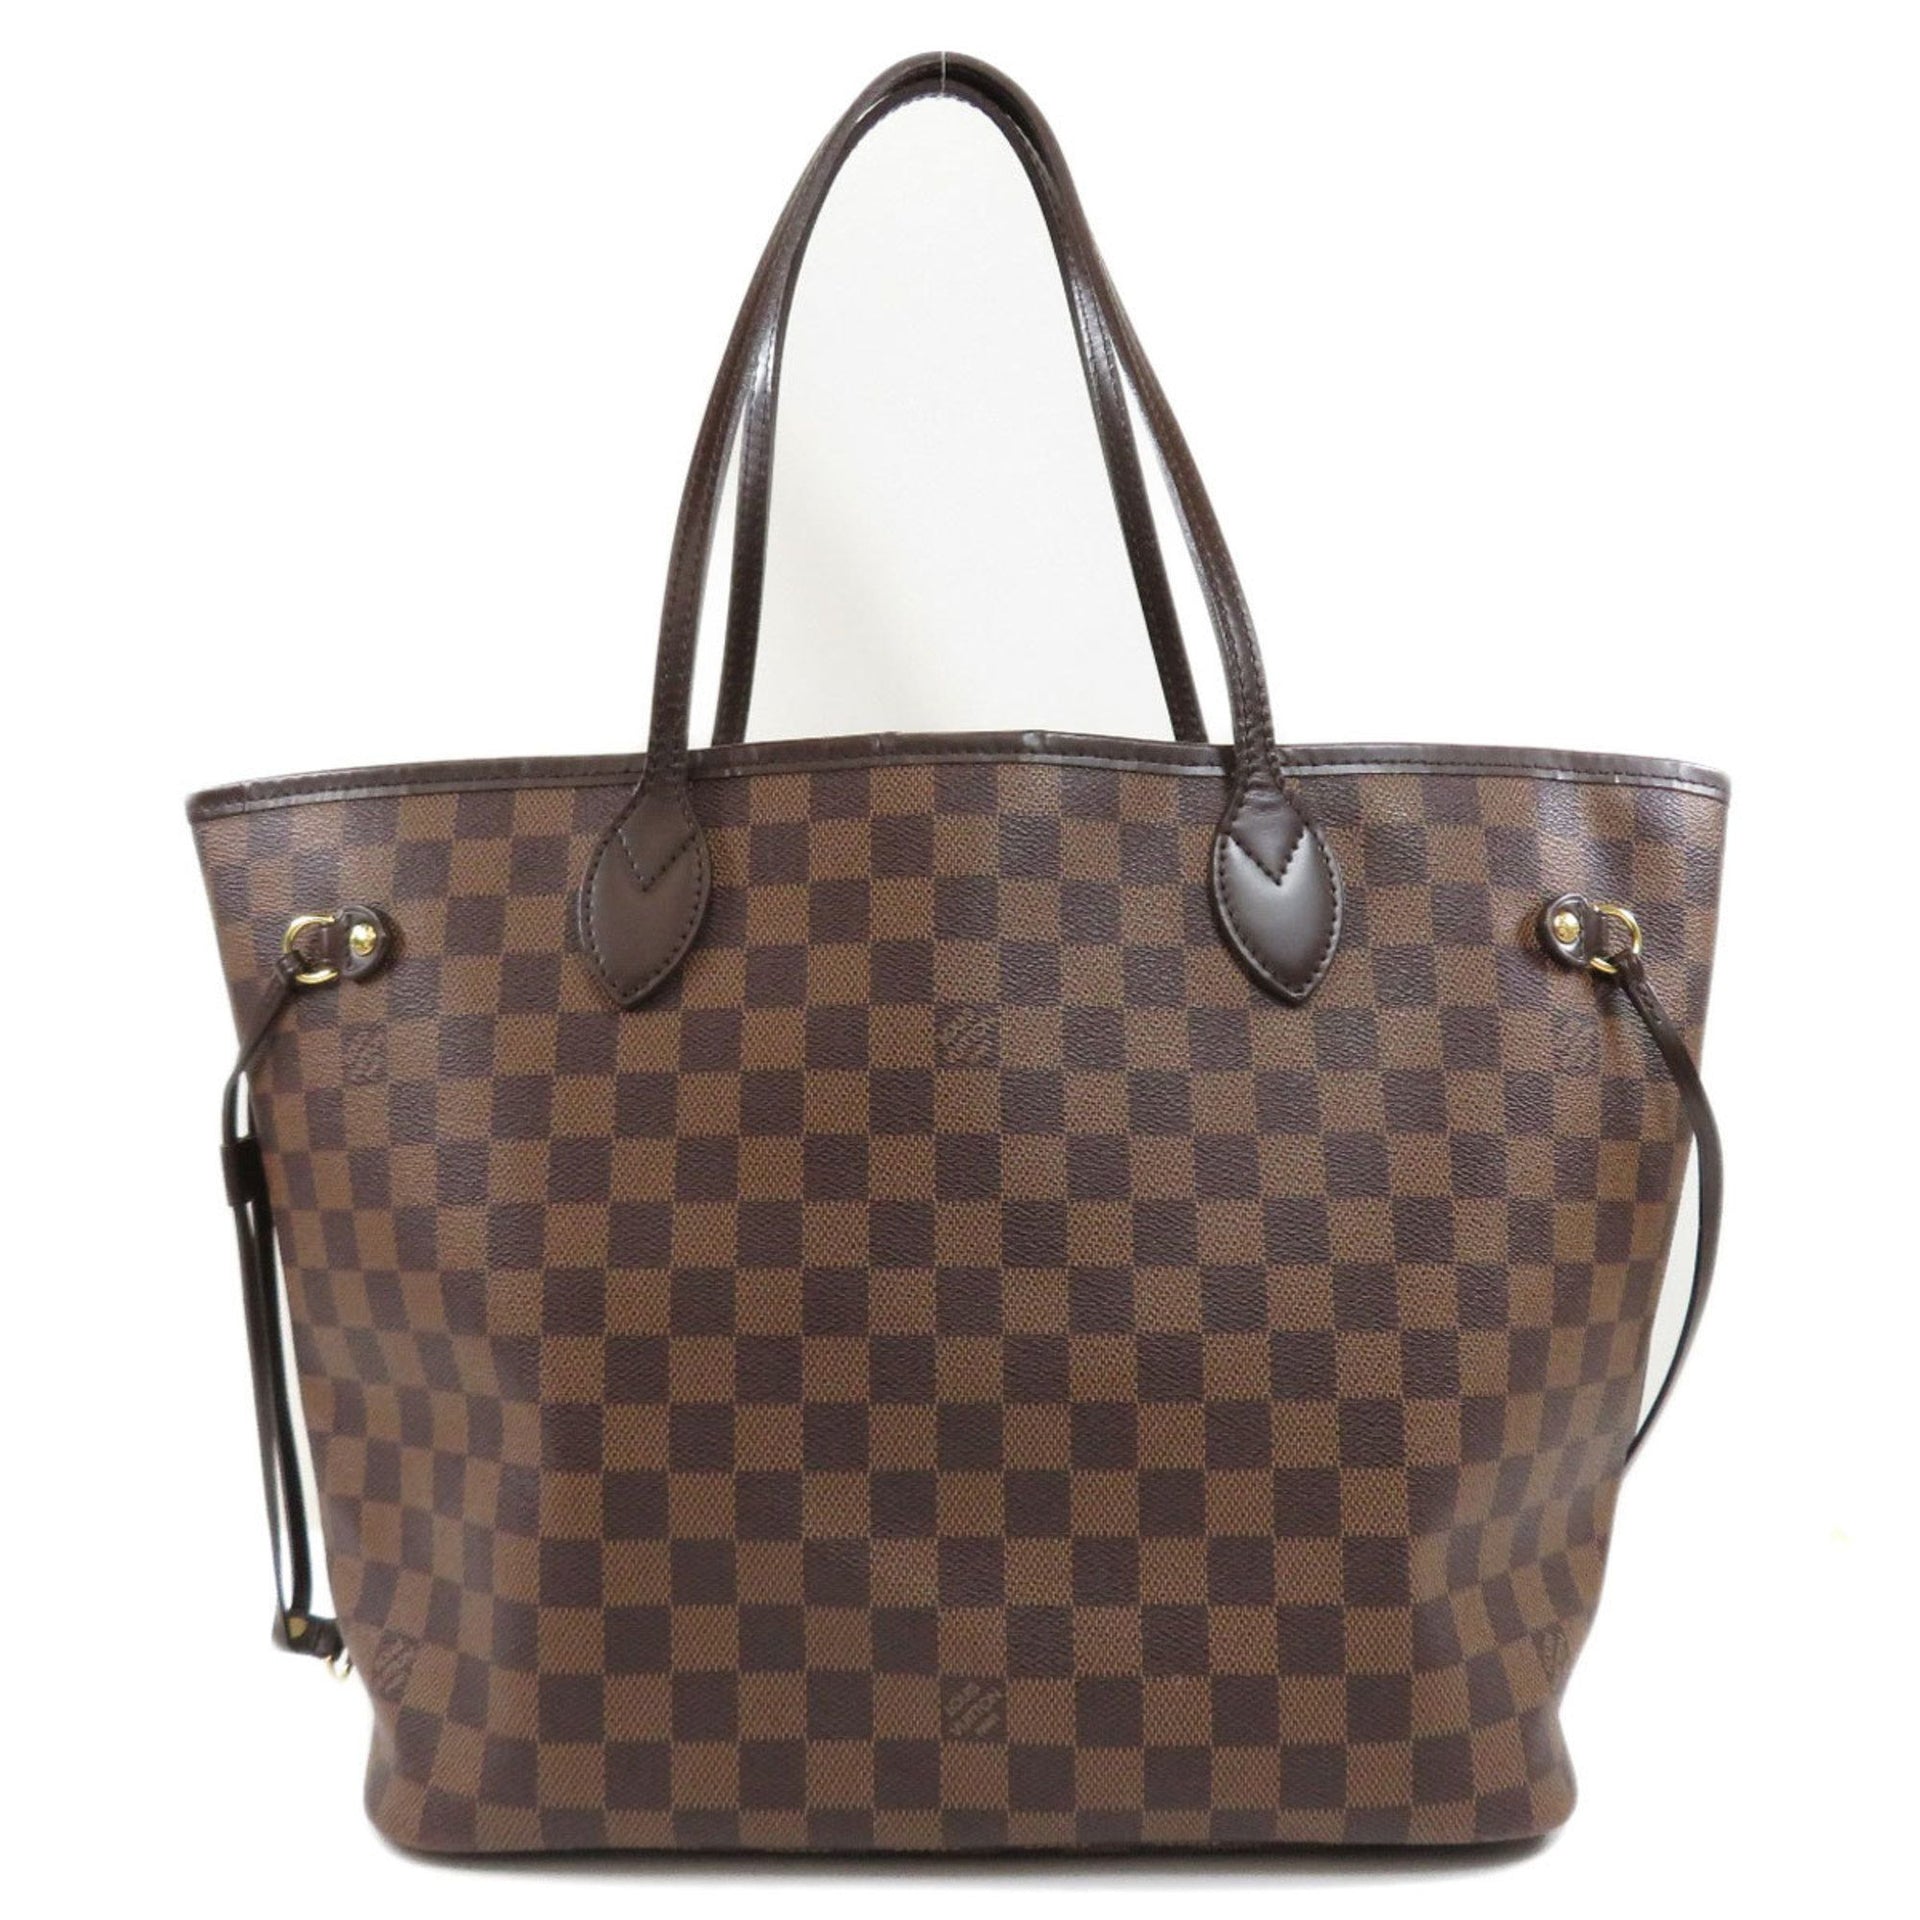 Authentic Louis Vuitton Neverfull MM Damier Ebene Baby Pink